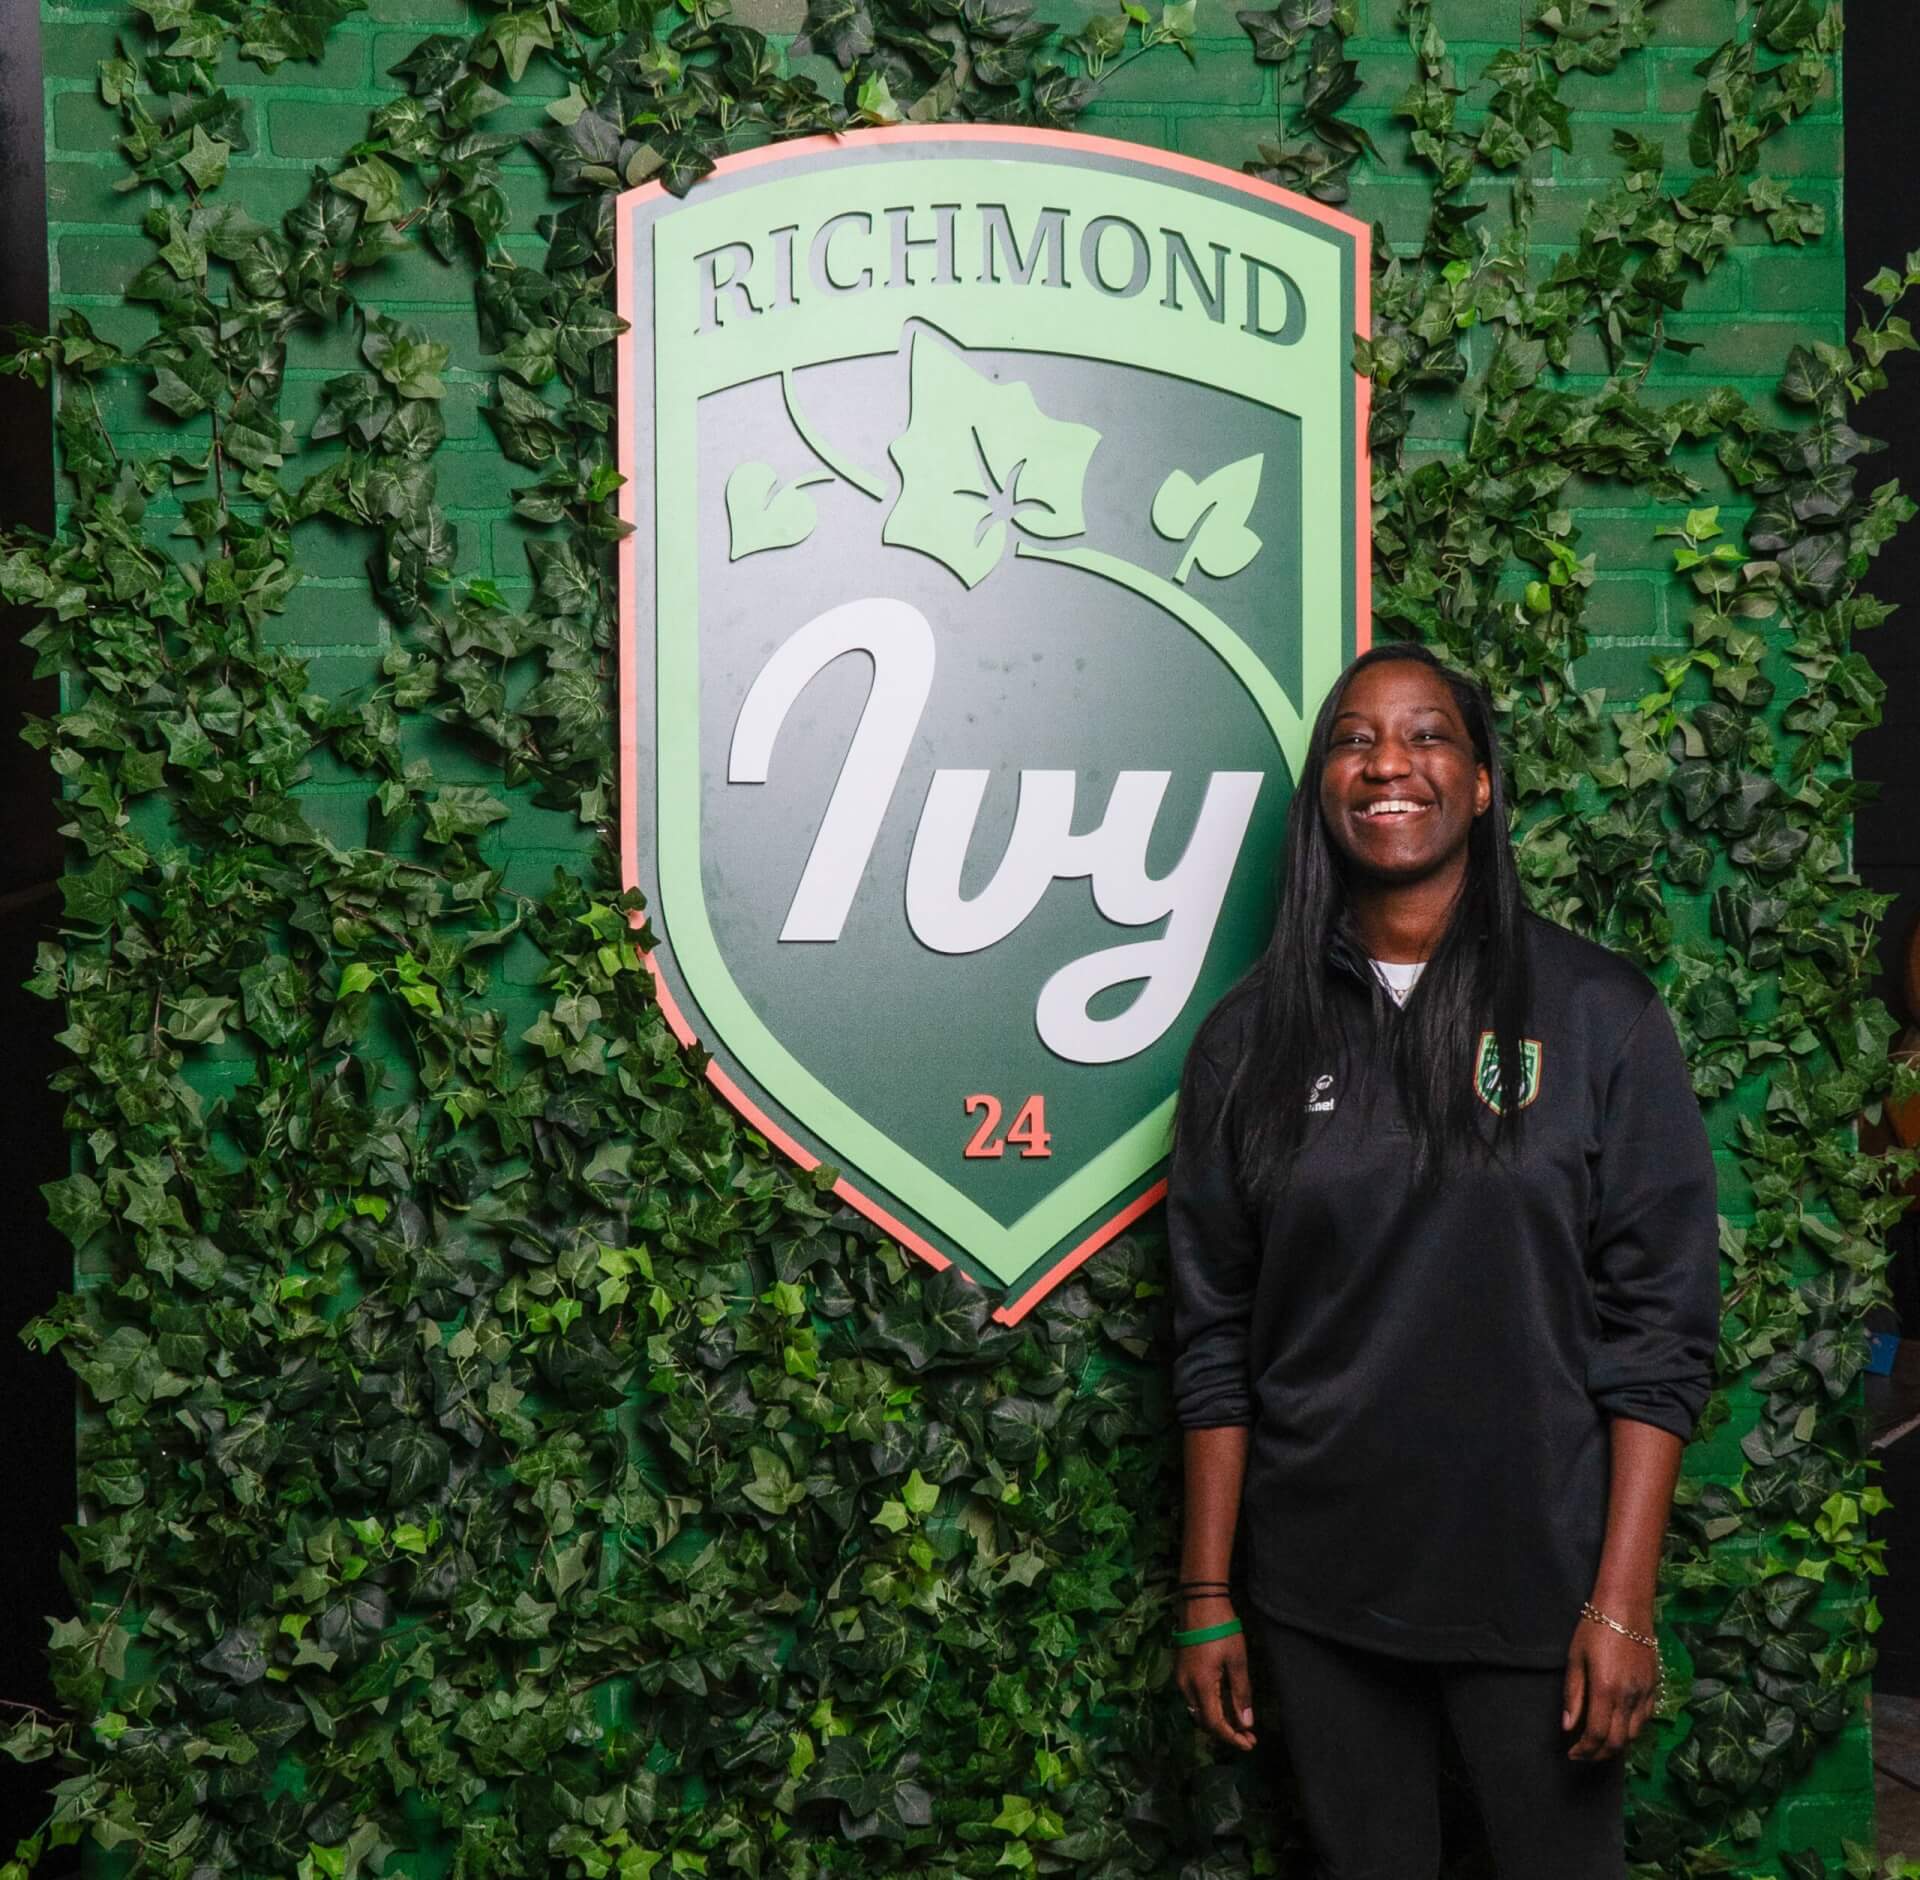 Alyn in front of a photo backdrop covered with ivy and hte richmond ivy crest